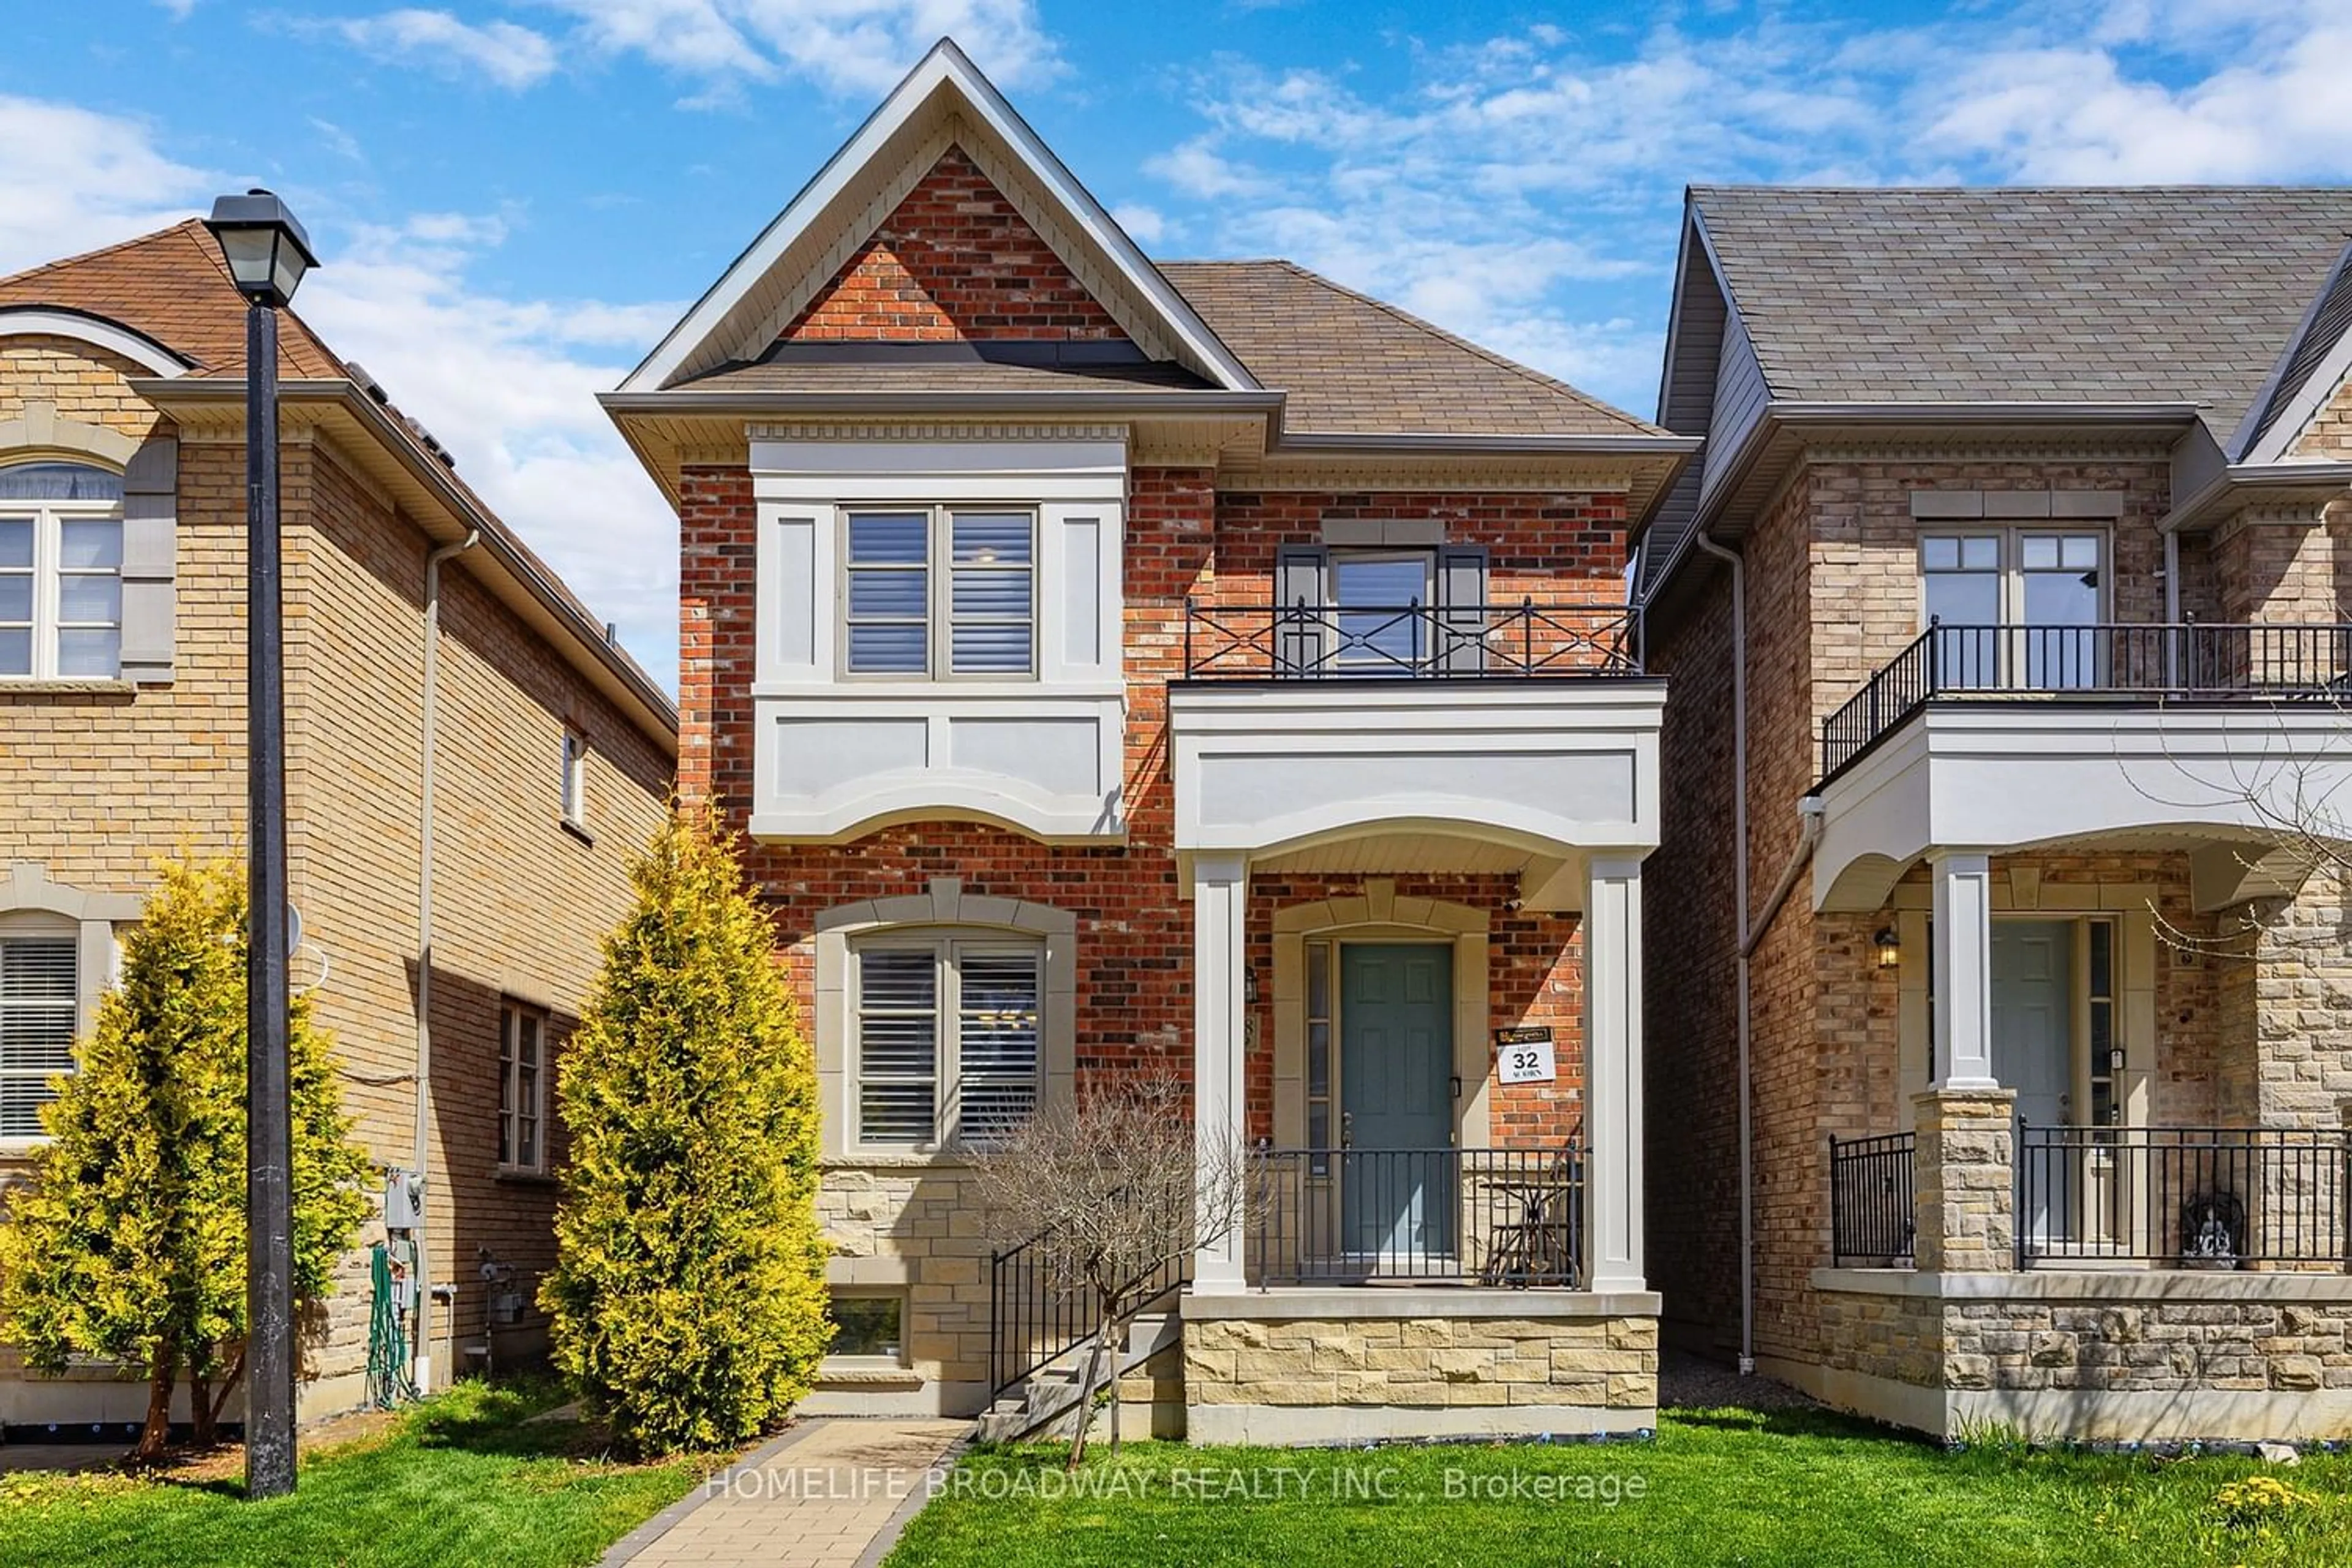 Home with brick exterior material for 18 Plantain Lane, Richmond Hill Ontario L4E 1B9